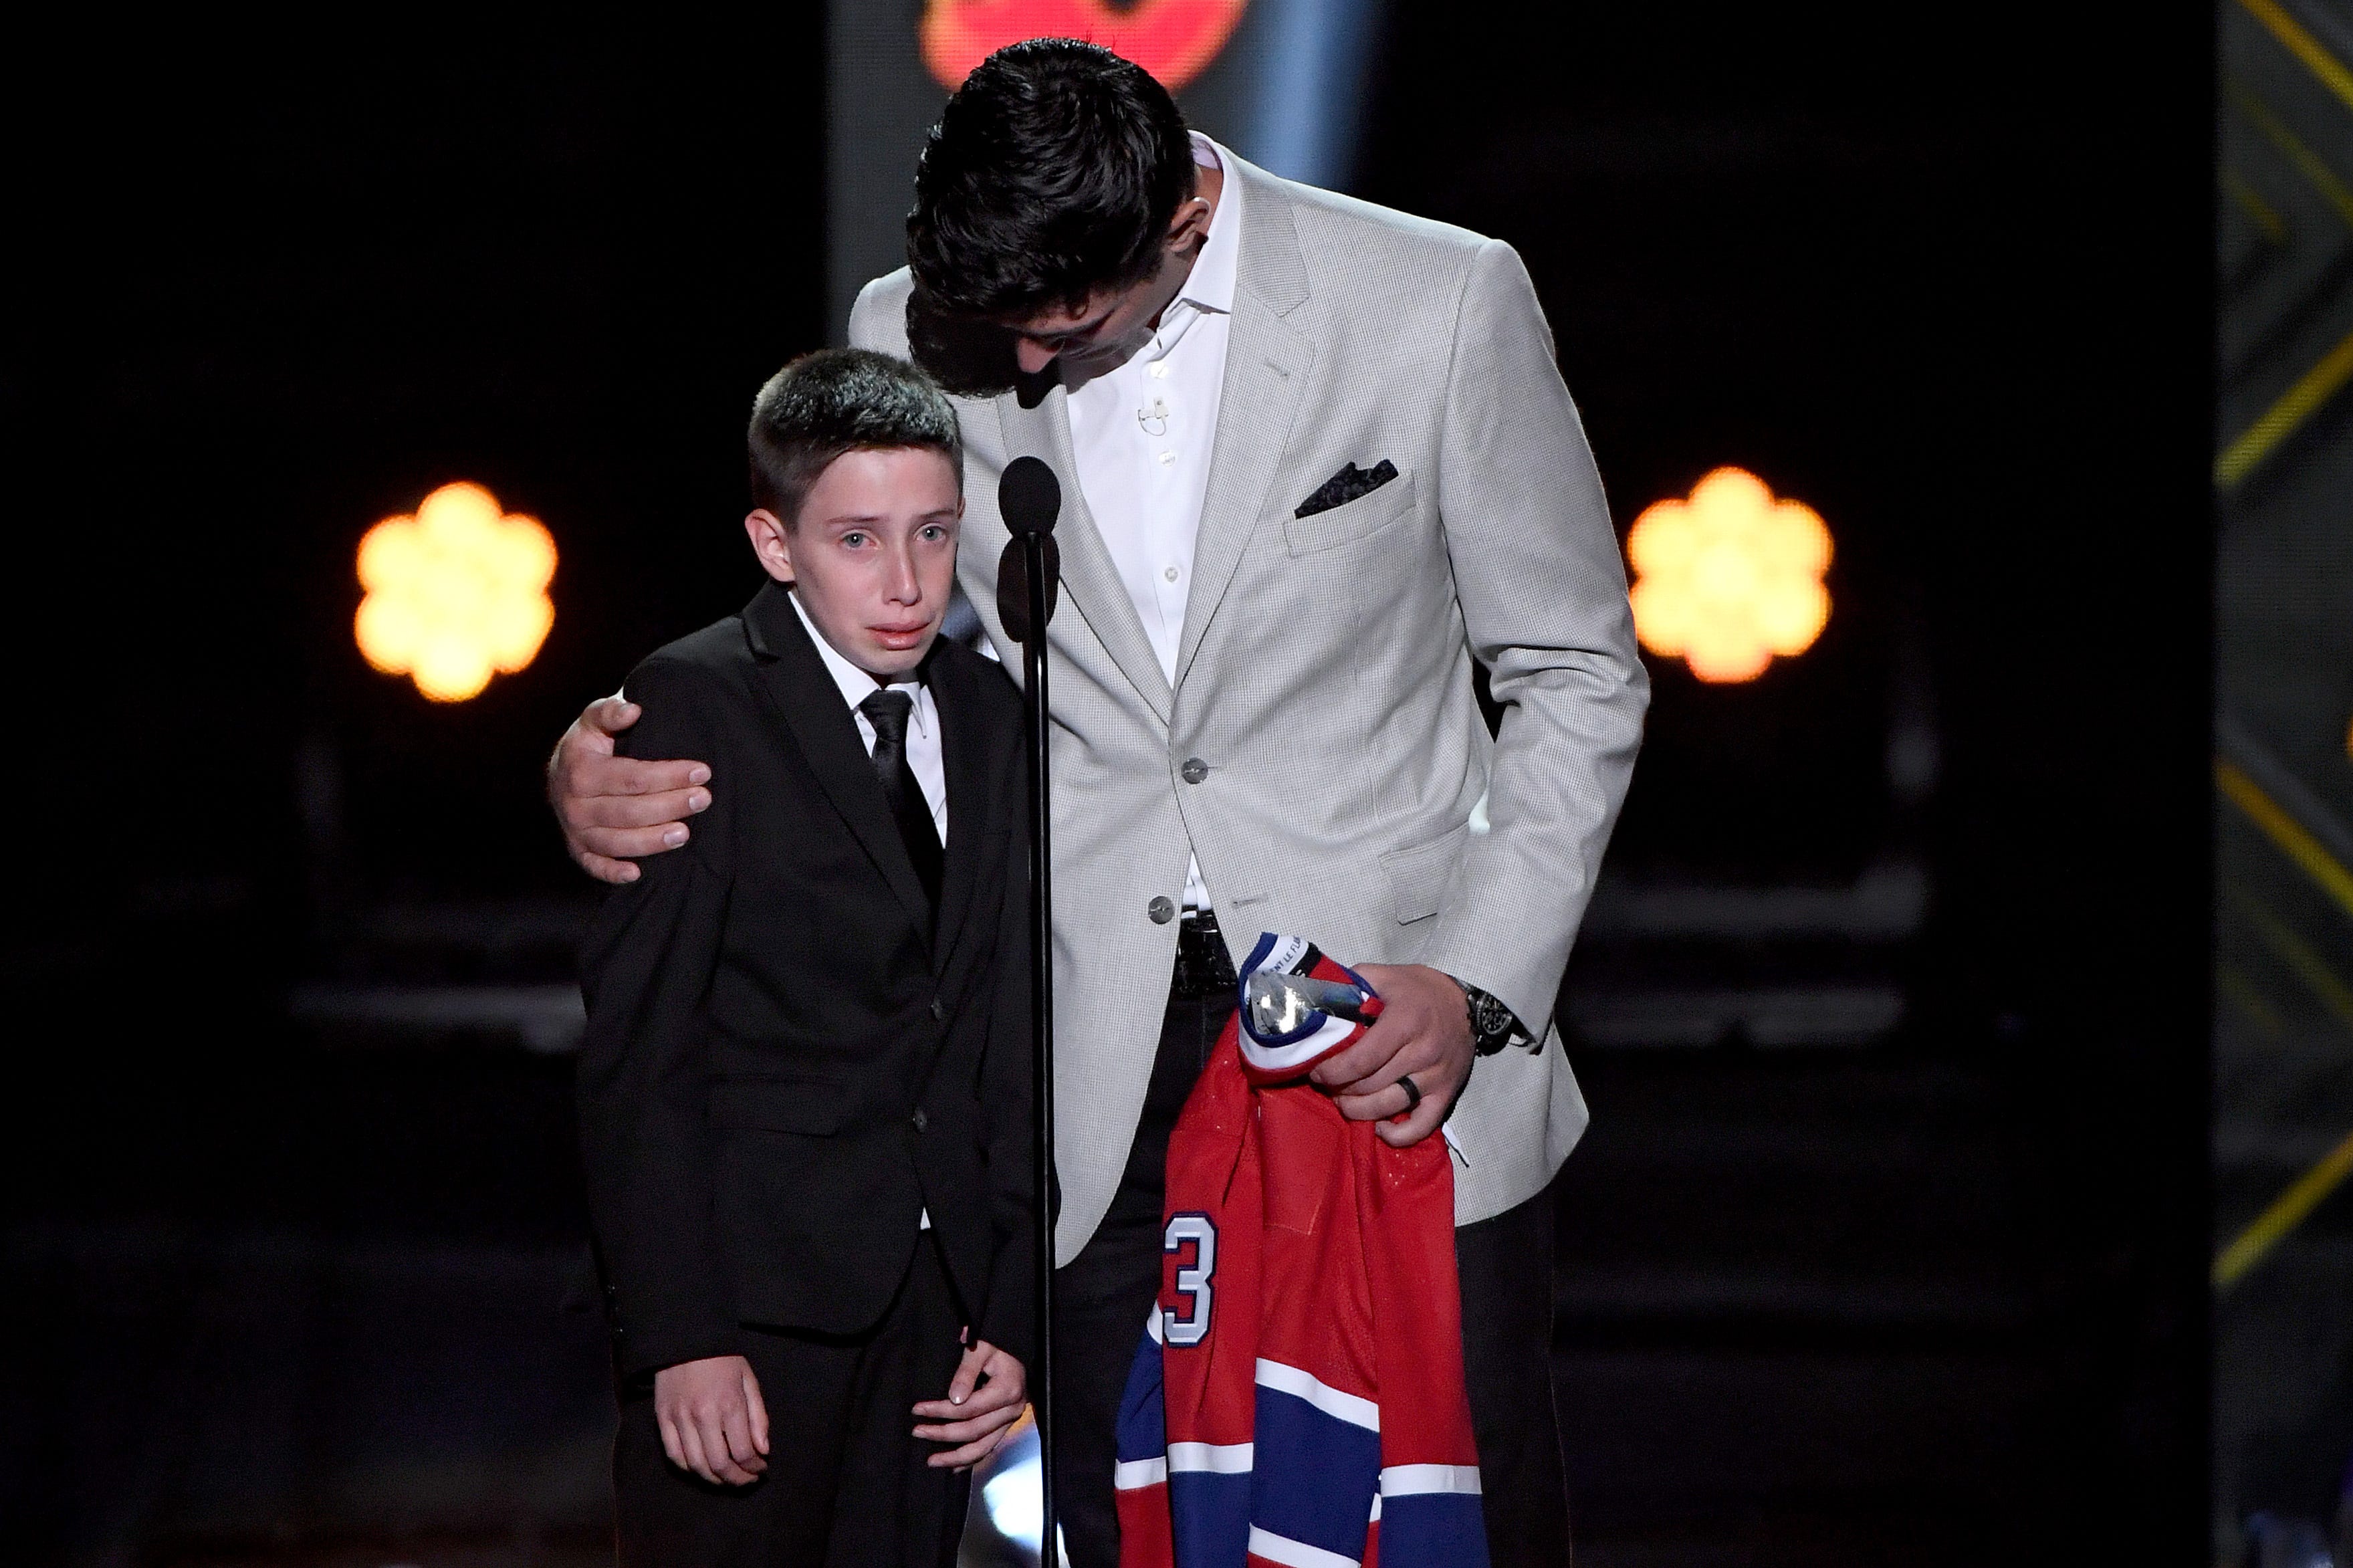 Carey Price reprises emotional moment with Anderson Whitehead at NHL Awards show